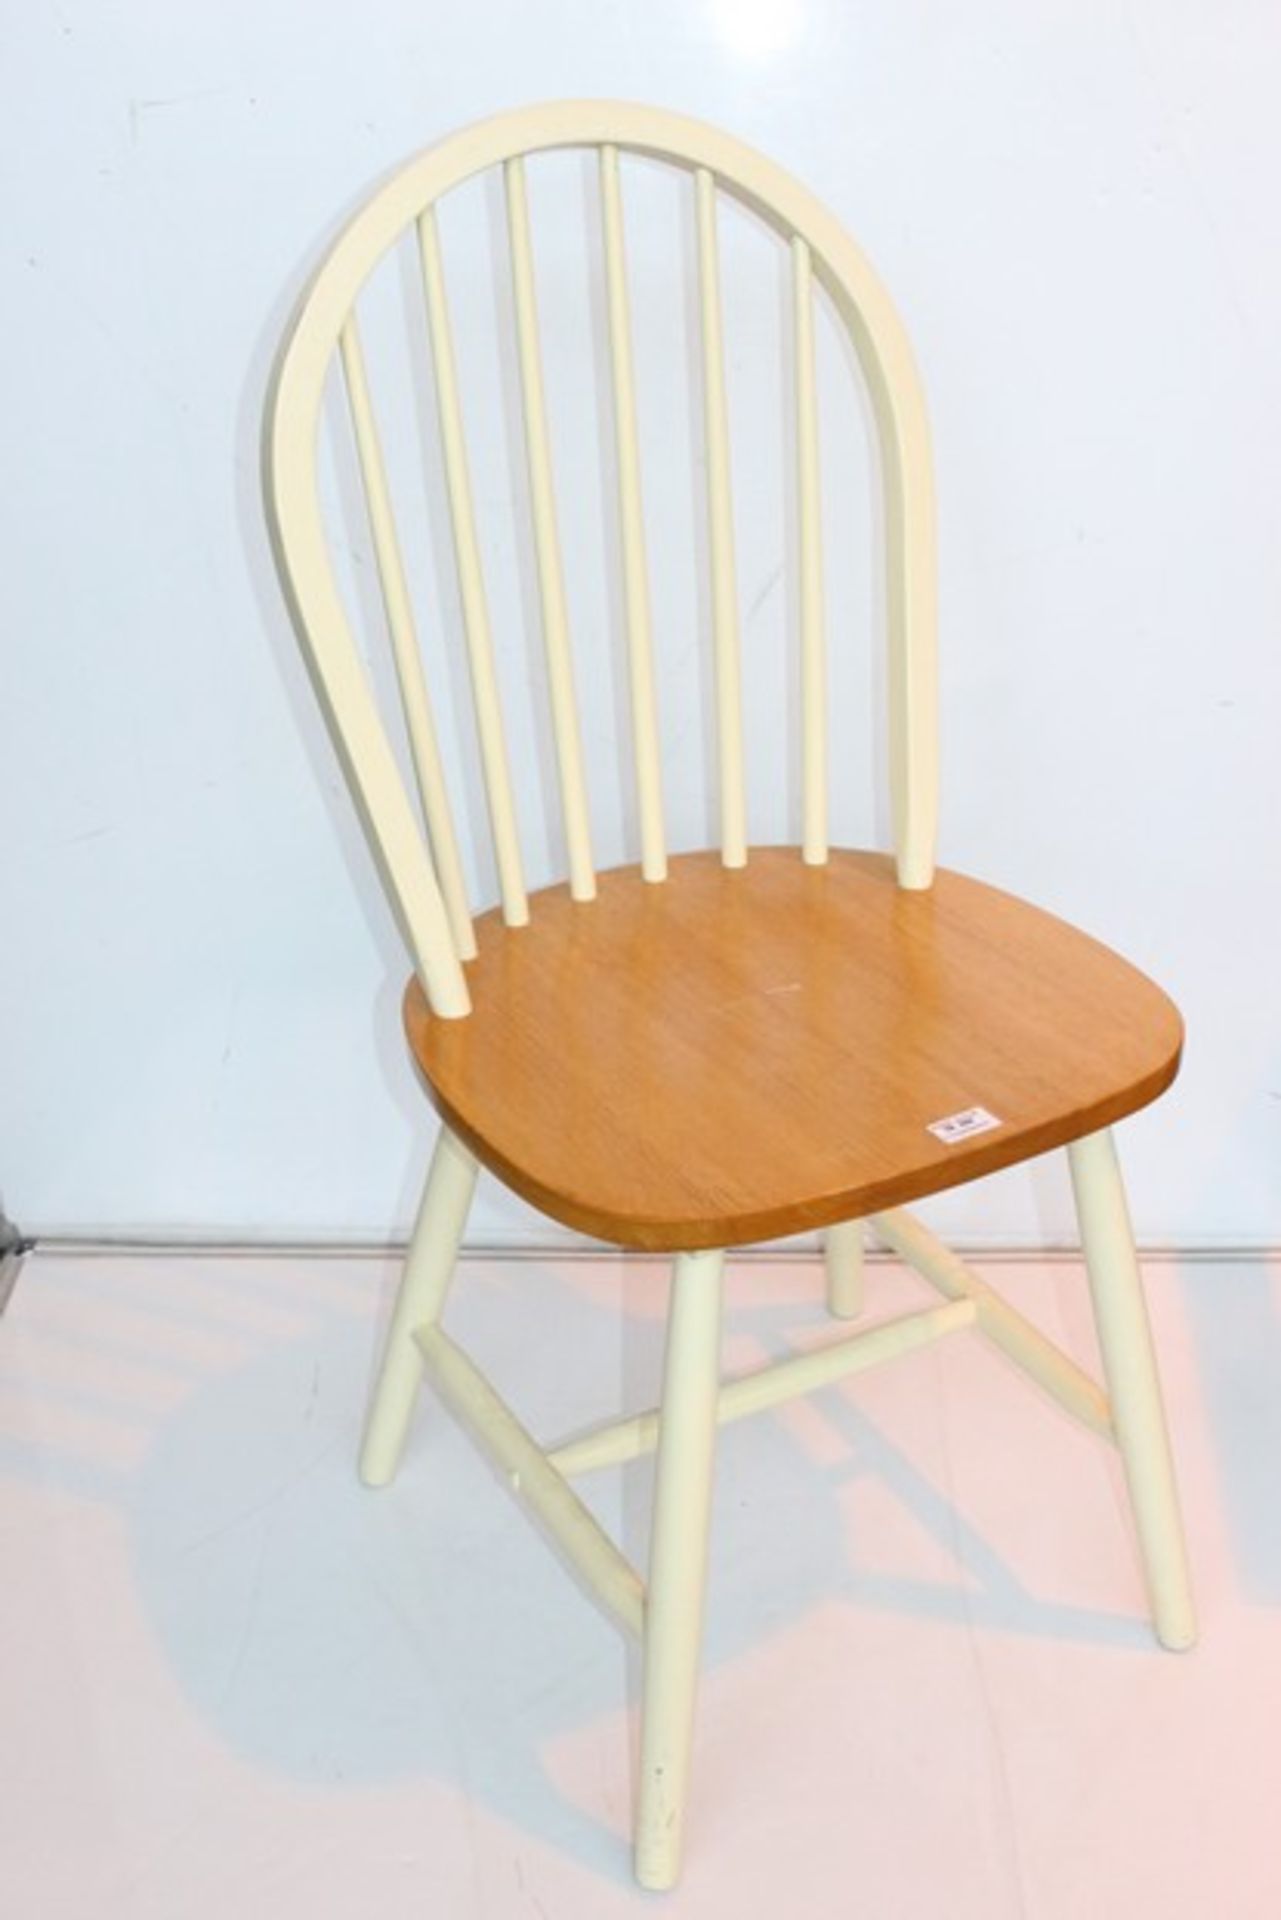 1 x WOODEN CHAIR *PLEASE NOTE THAT THE BID PRICE IS MULTIPLIED BY THE NUMBER OF ITEMS IN THE LOT.